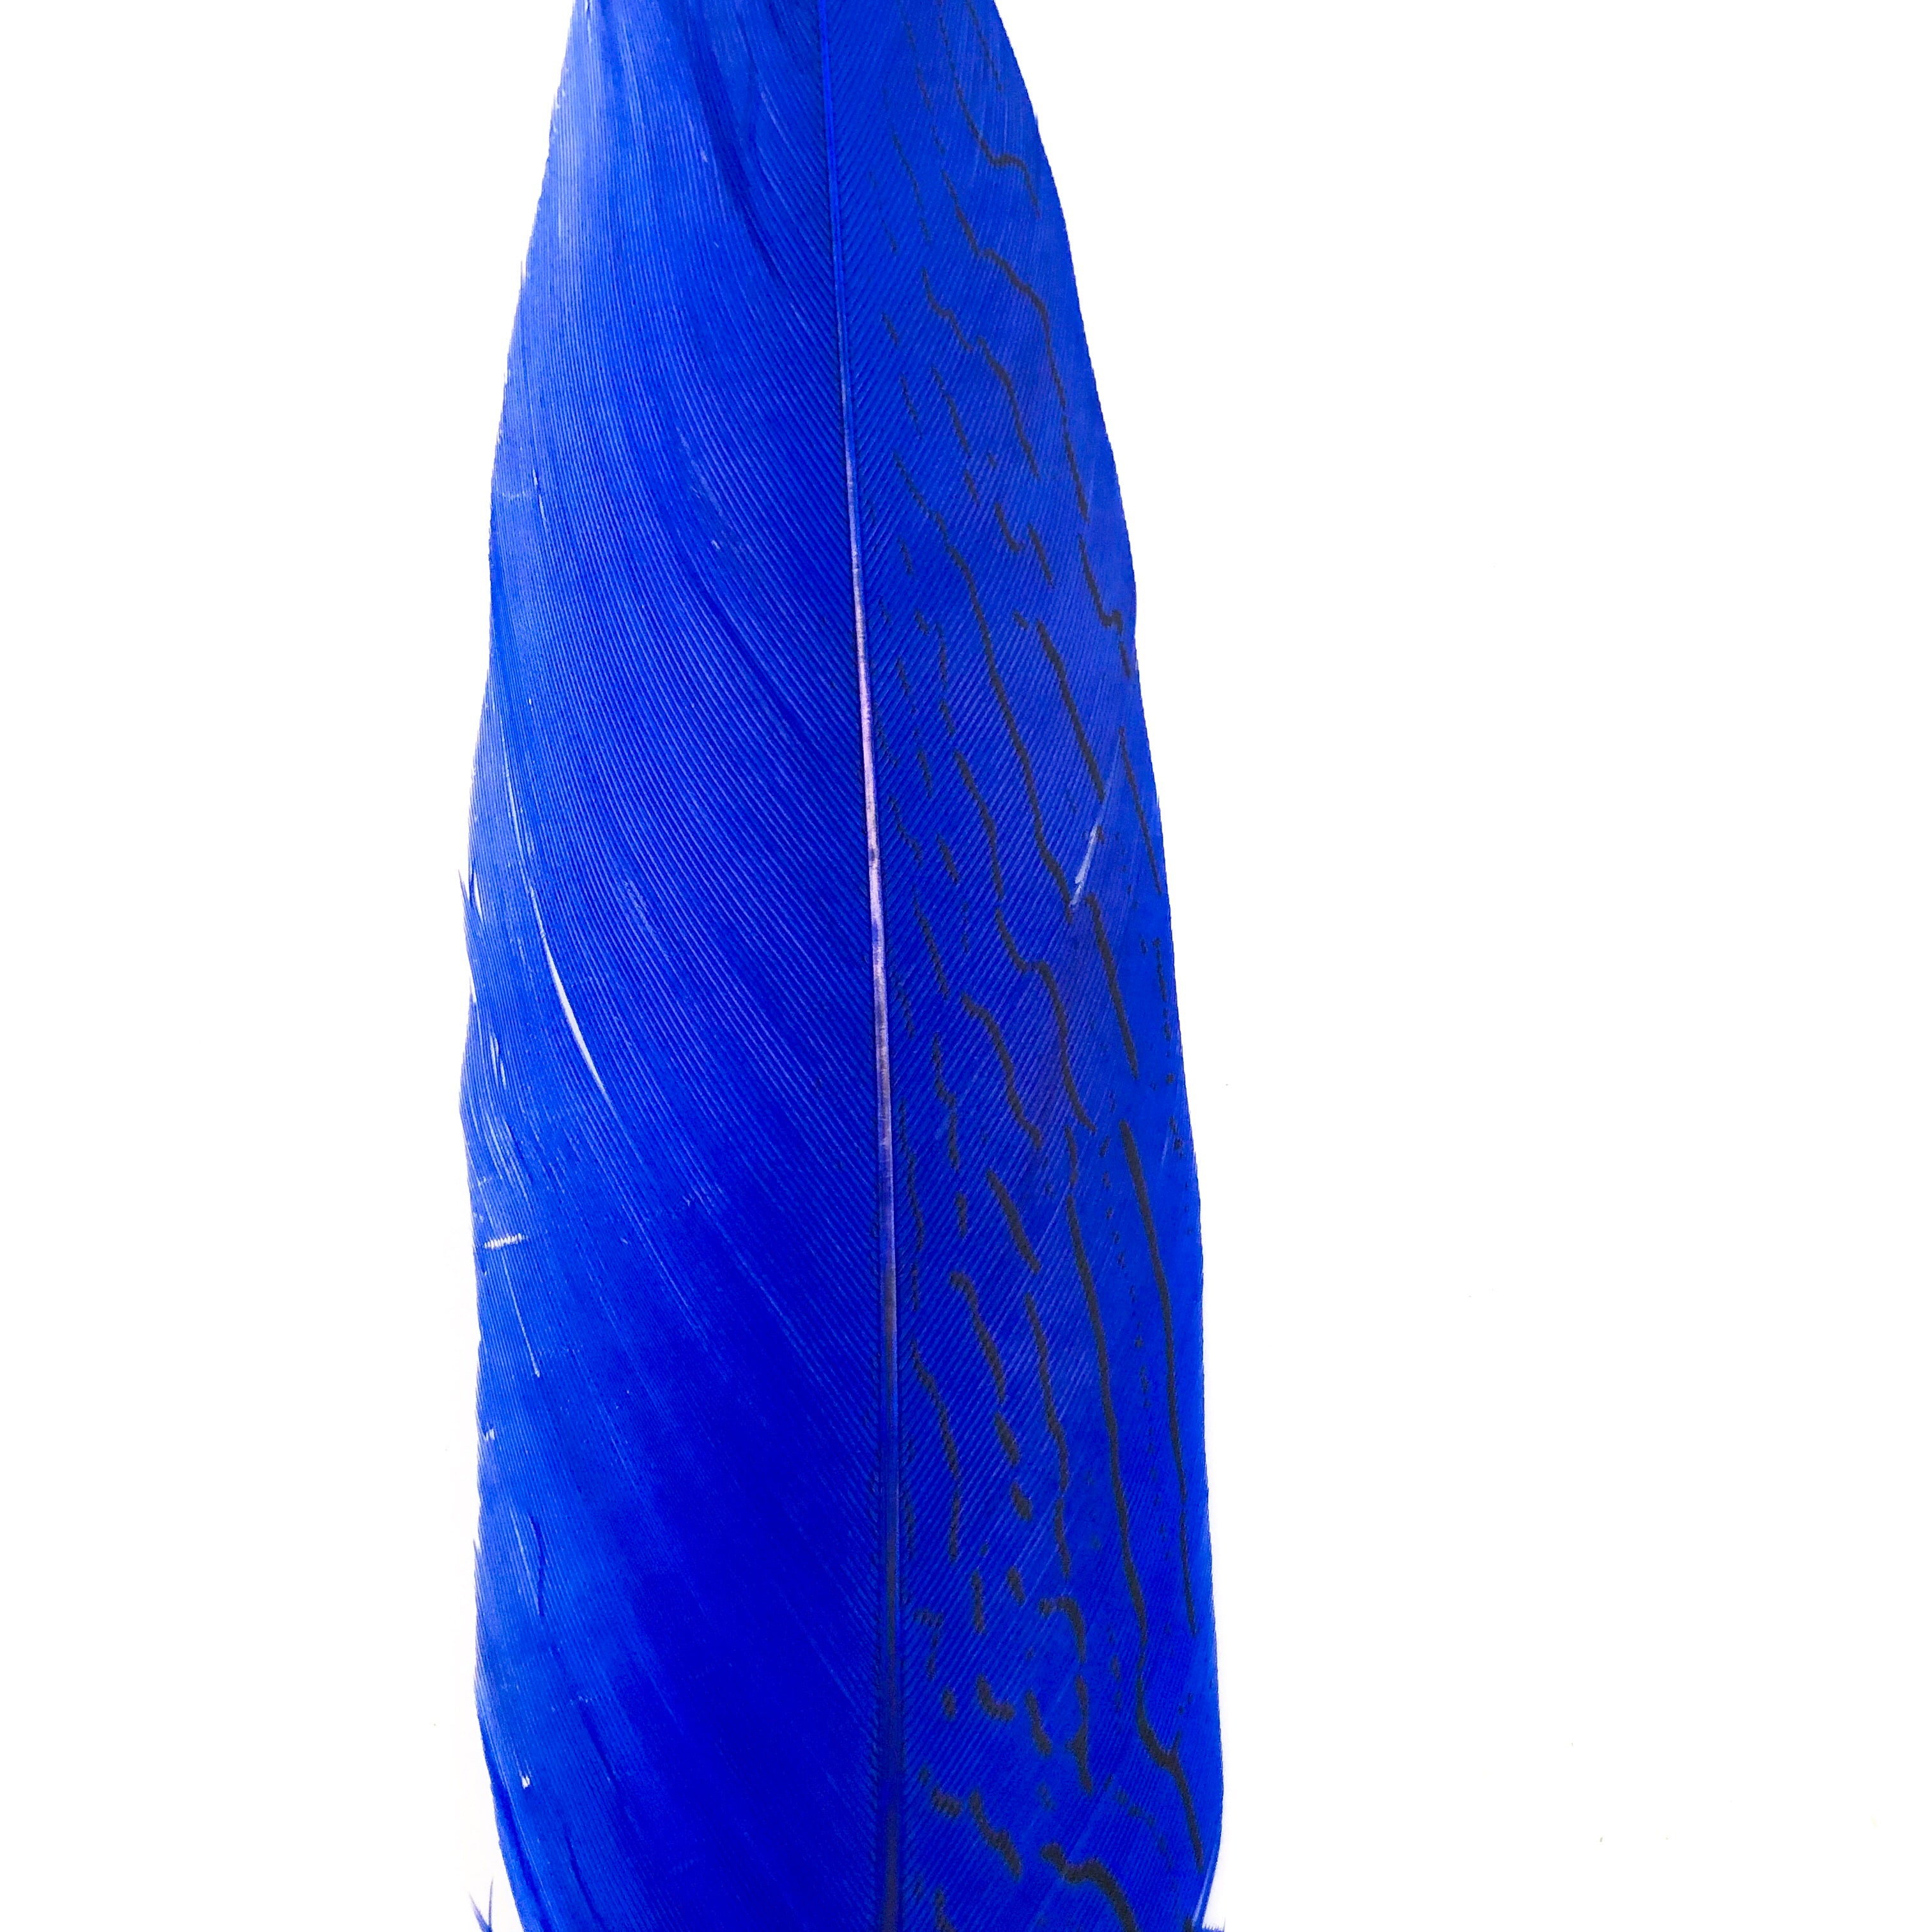 6" to 10" Silver Pheasant Tail Feather - Royal Blue ((SECONDS))